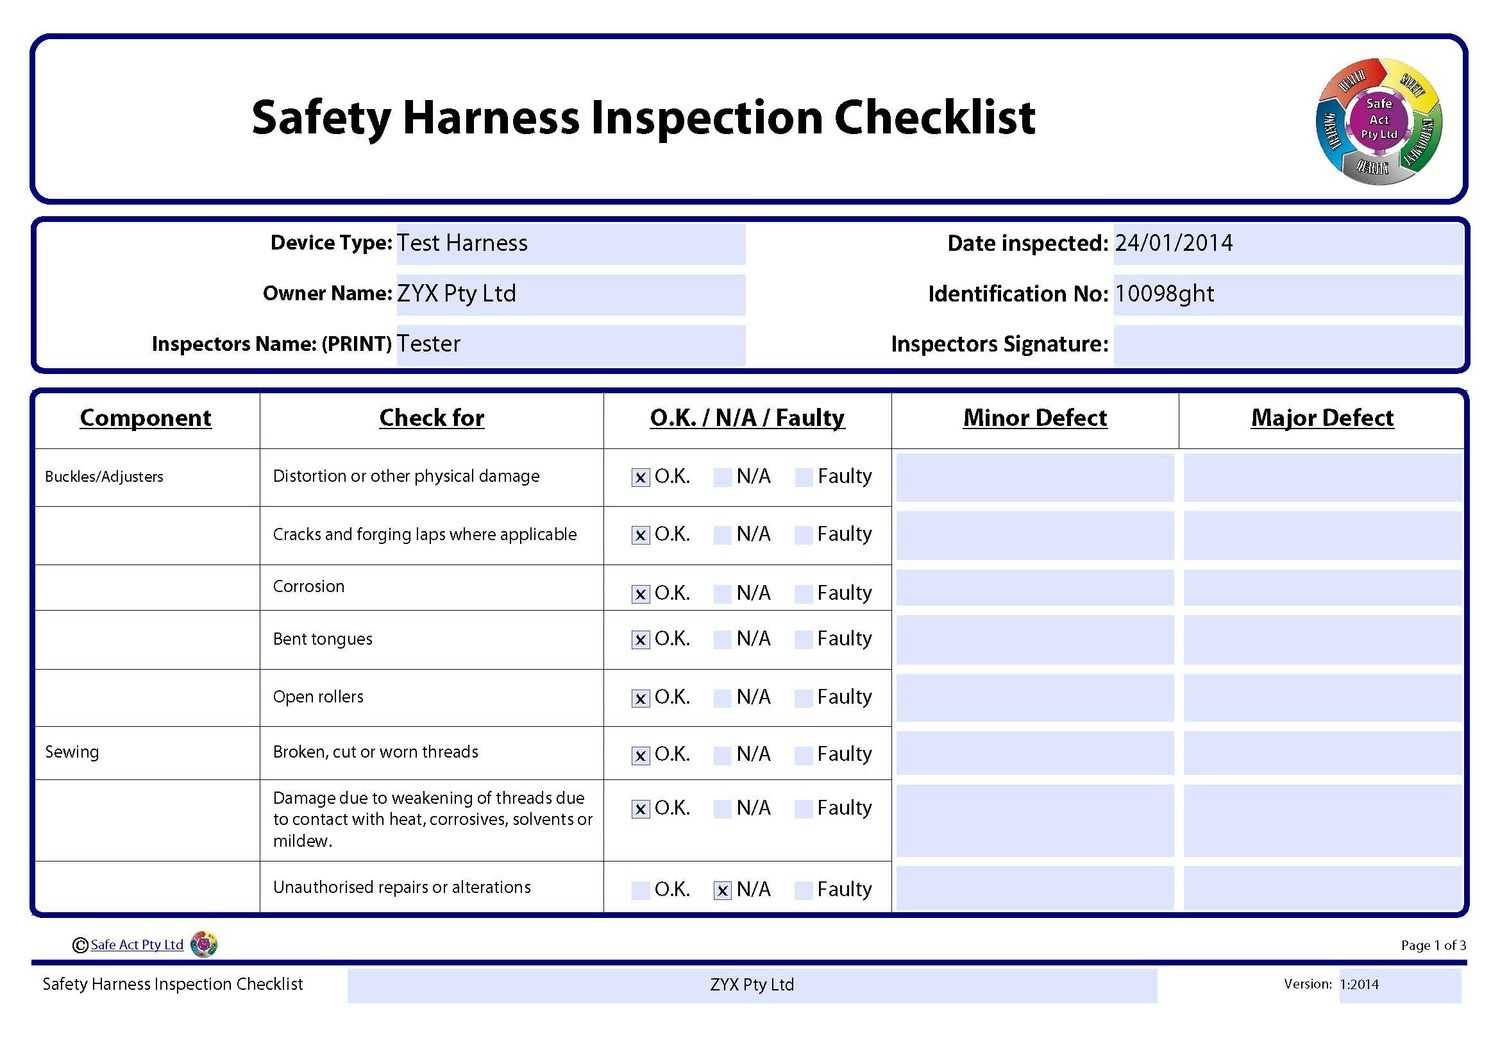 Safety Harness Inspection Checklist Regarding Certificate Of Inspection Template